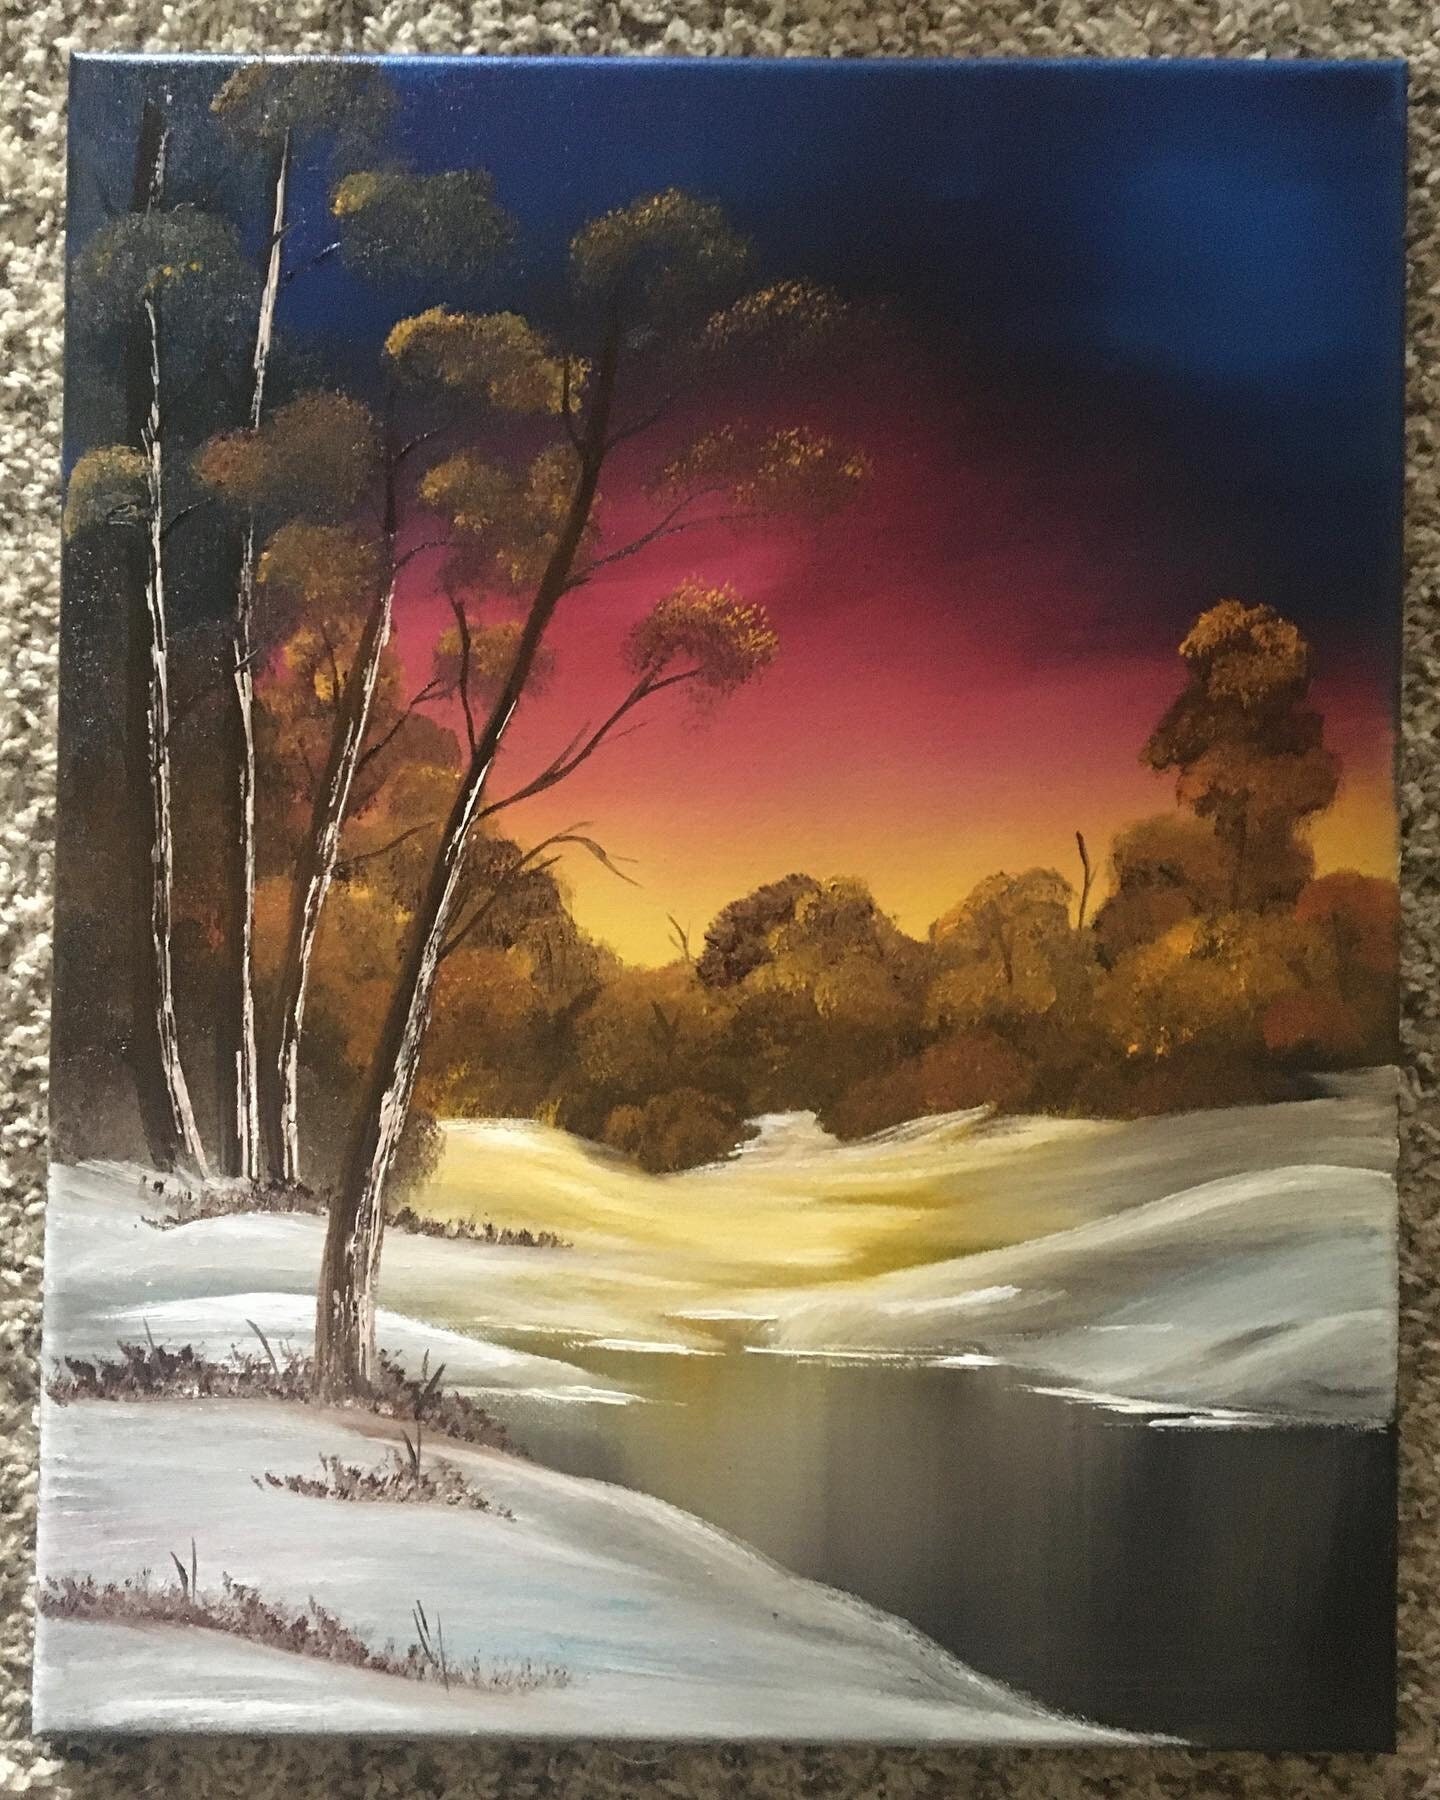 Bob Ross style Oil Painting 18x24 Canvas Original “Reflections” Home Decor